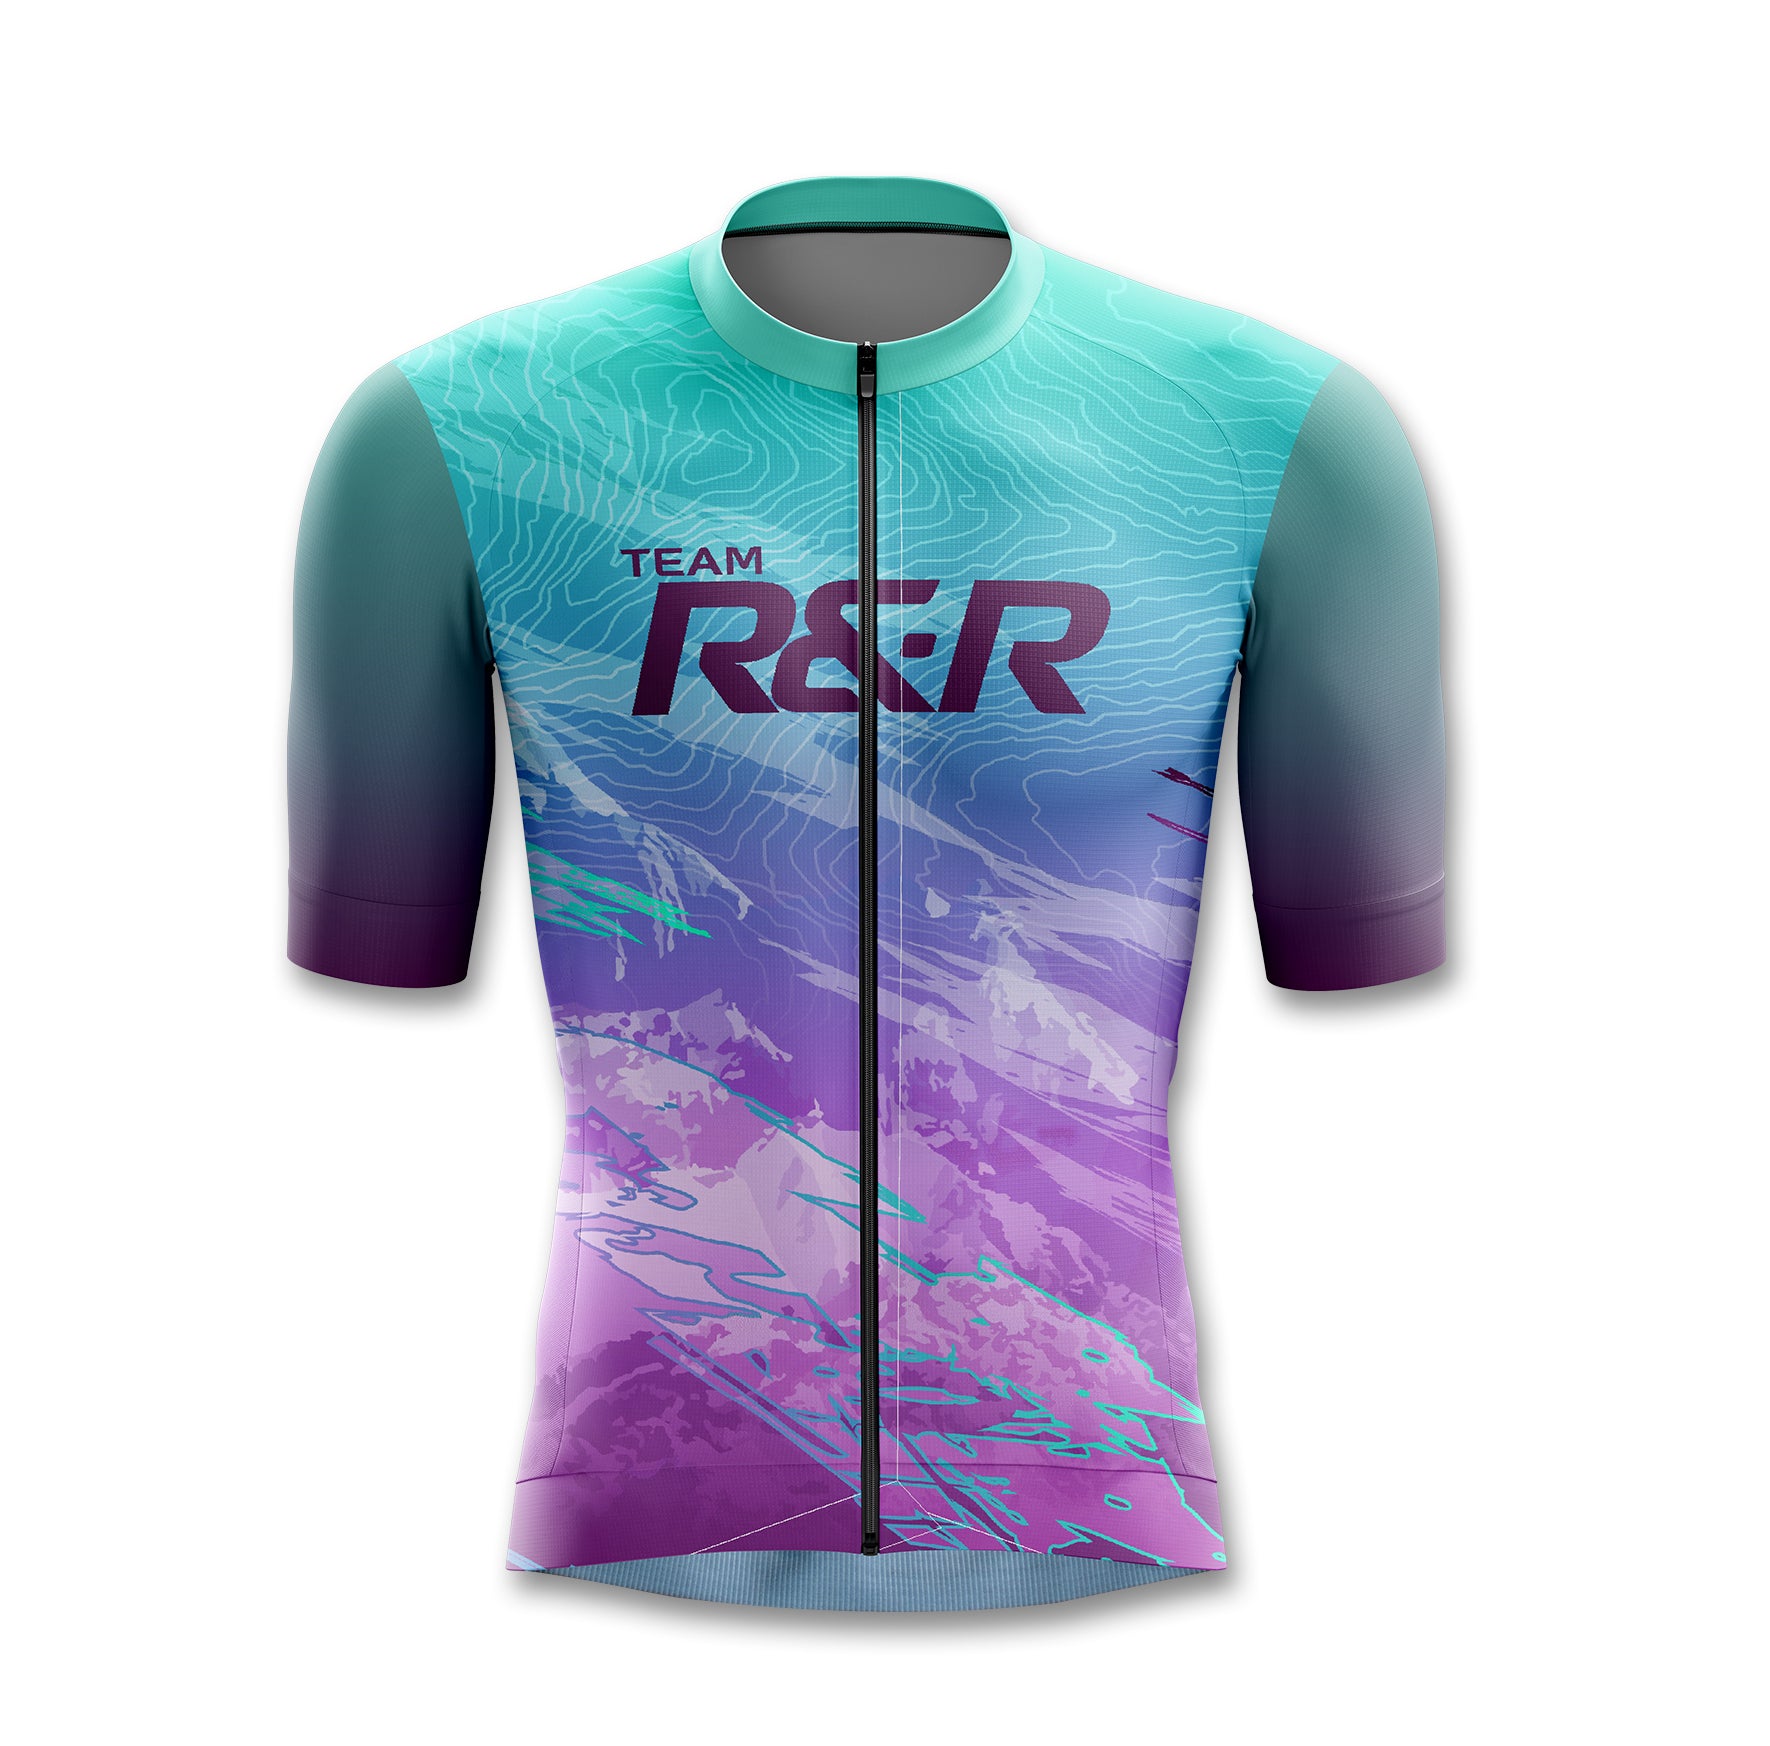 Northern Lights Seamless Cycling Jersey - R&R Sports Apparel